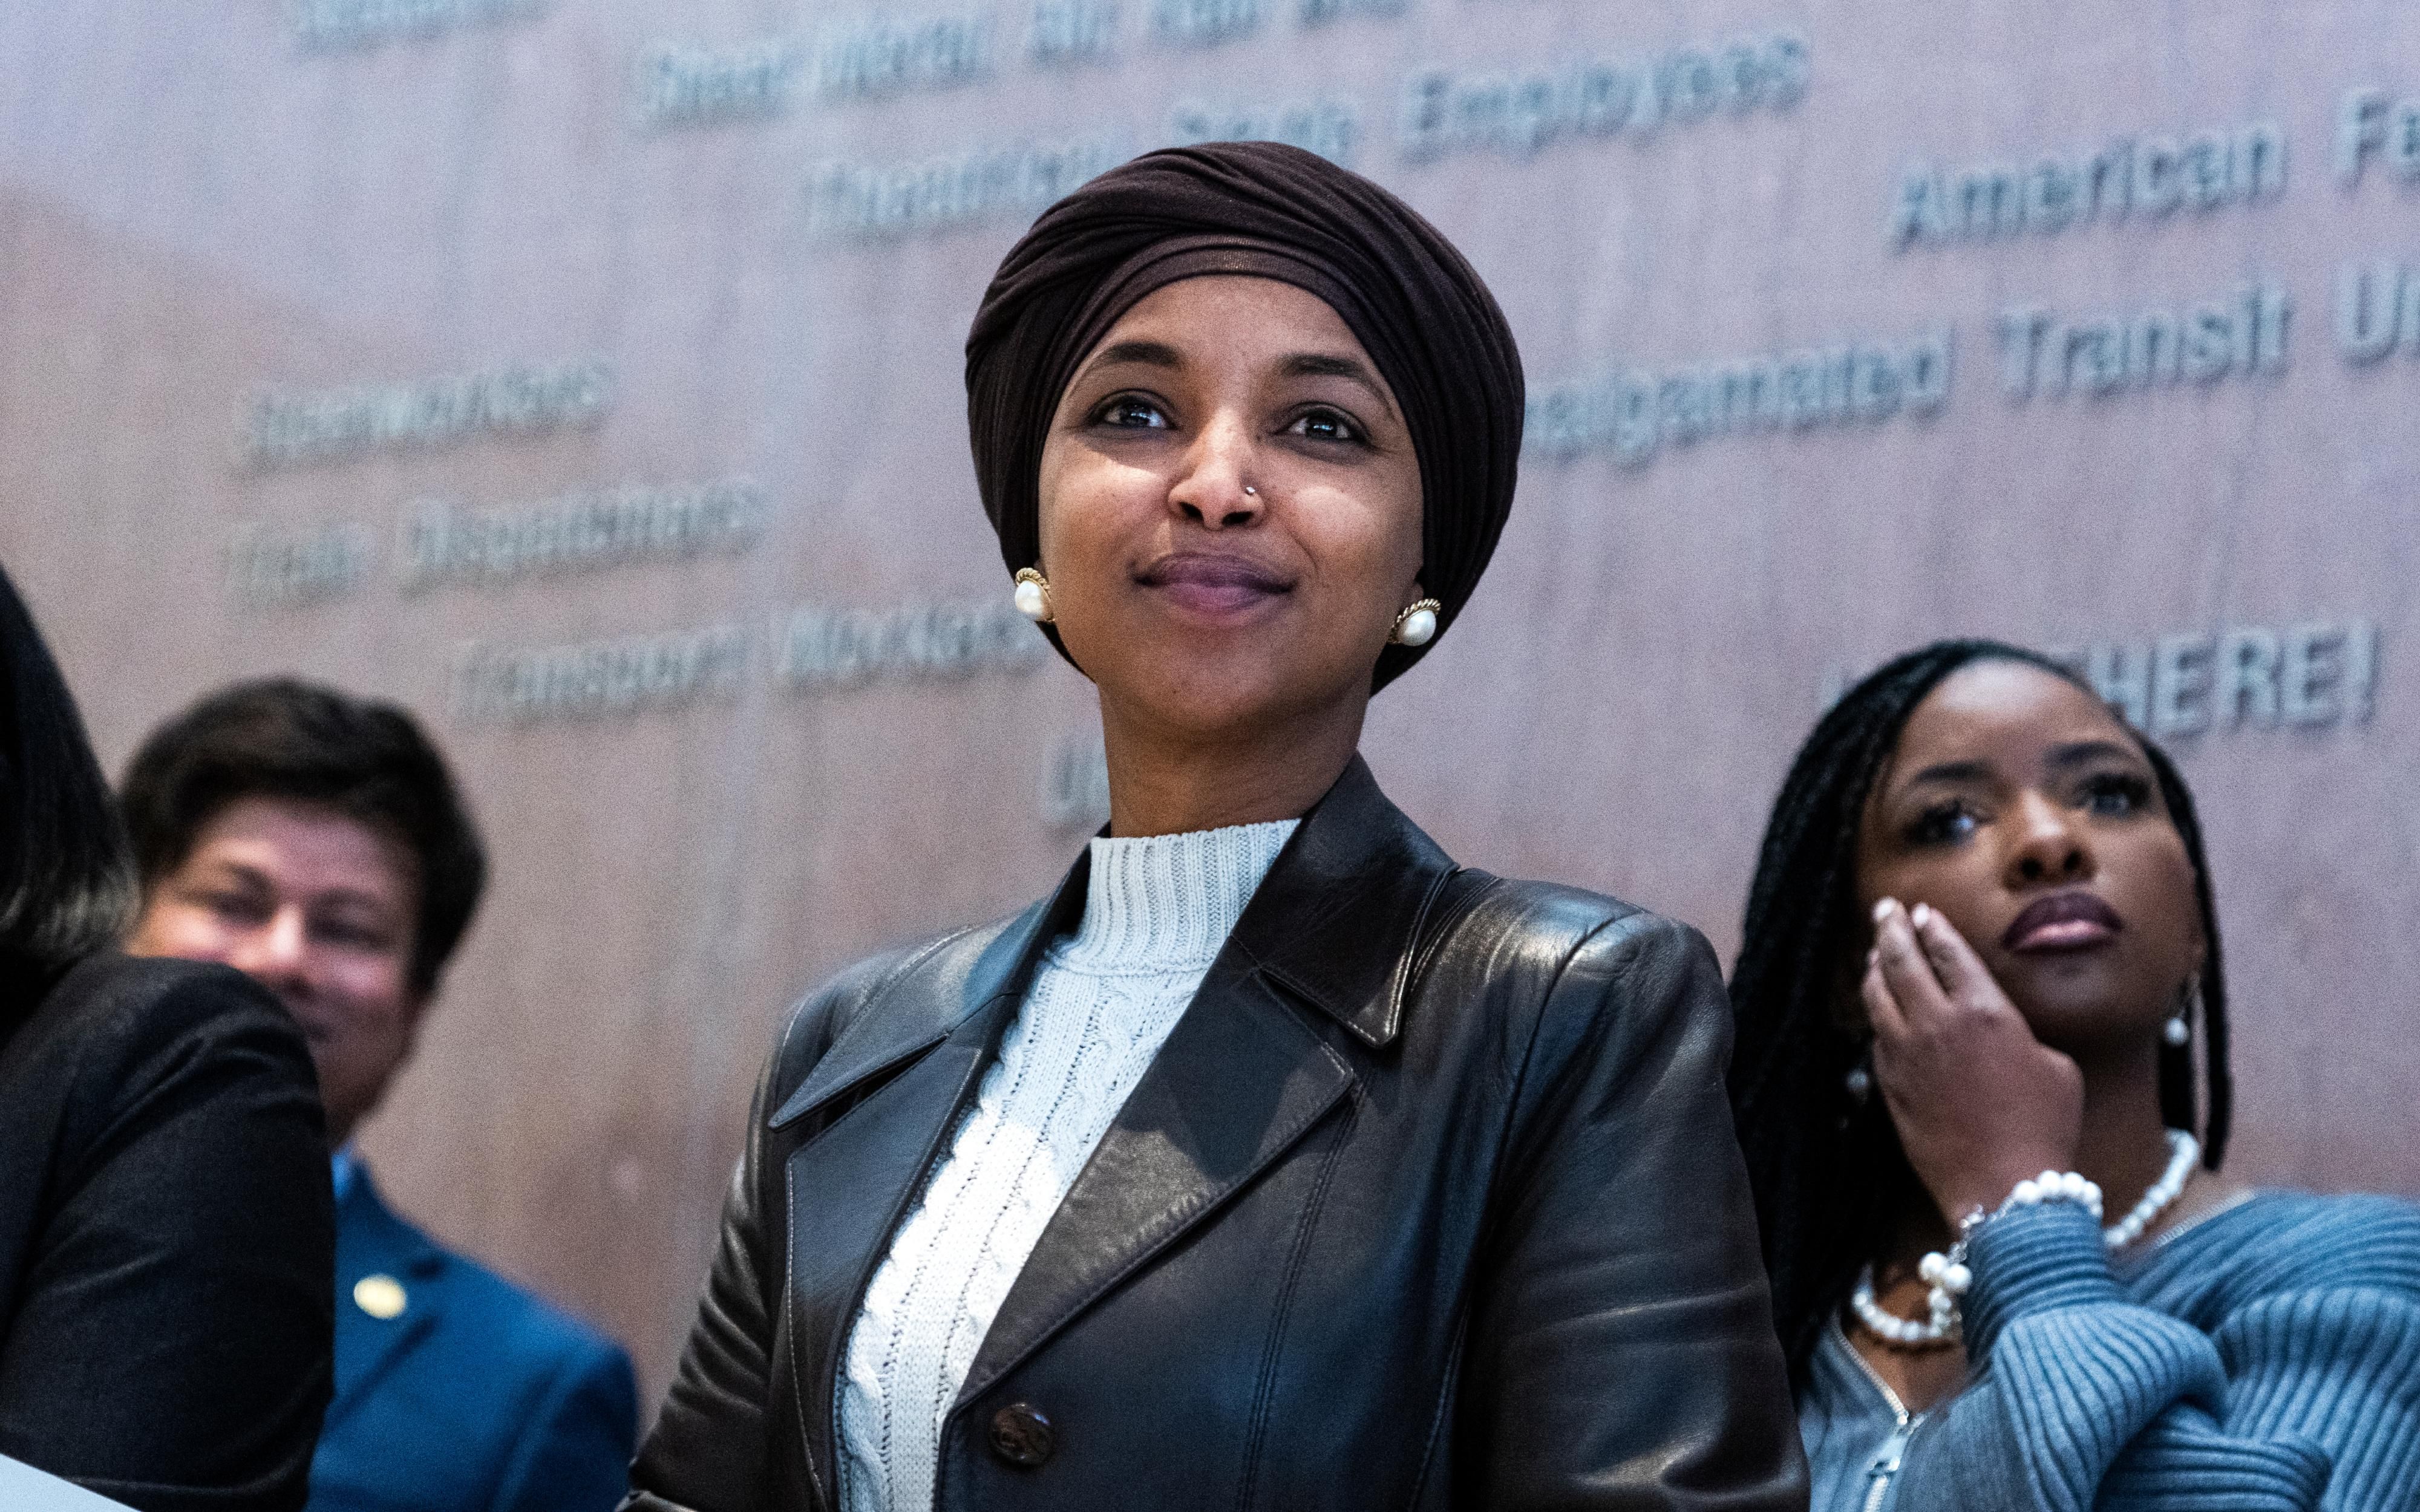 Rep. Ilhan Omar speaks at a press conference